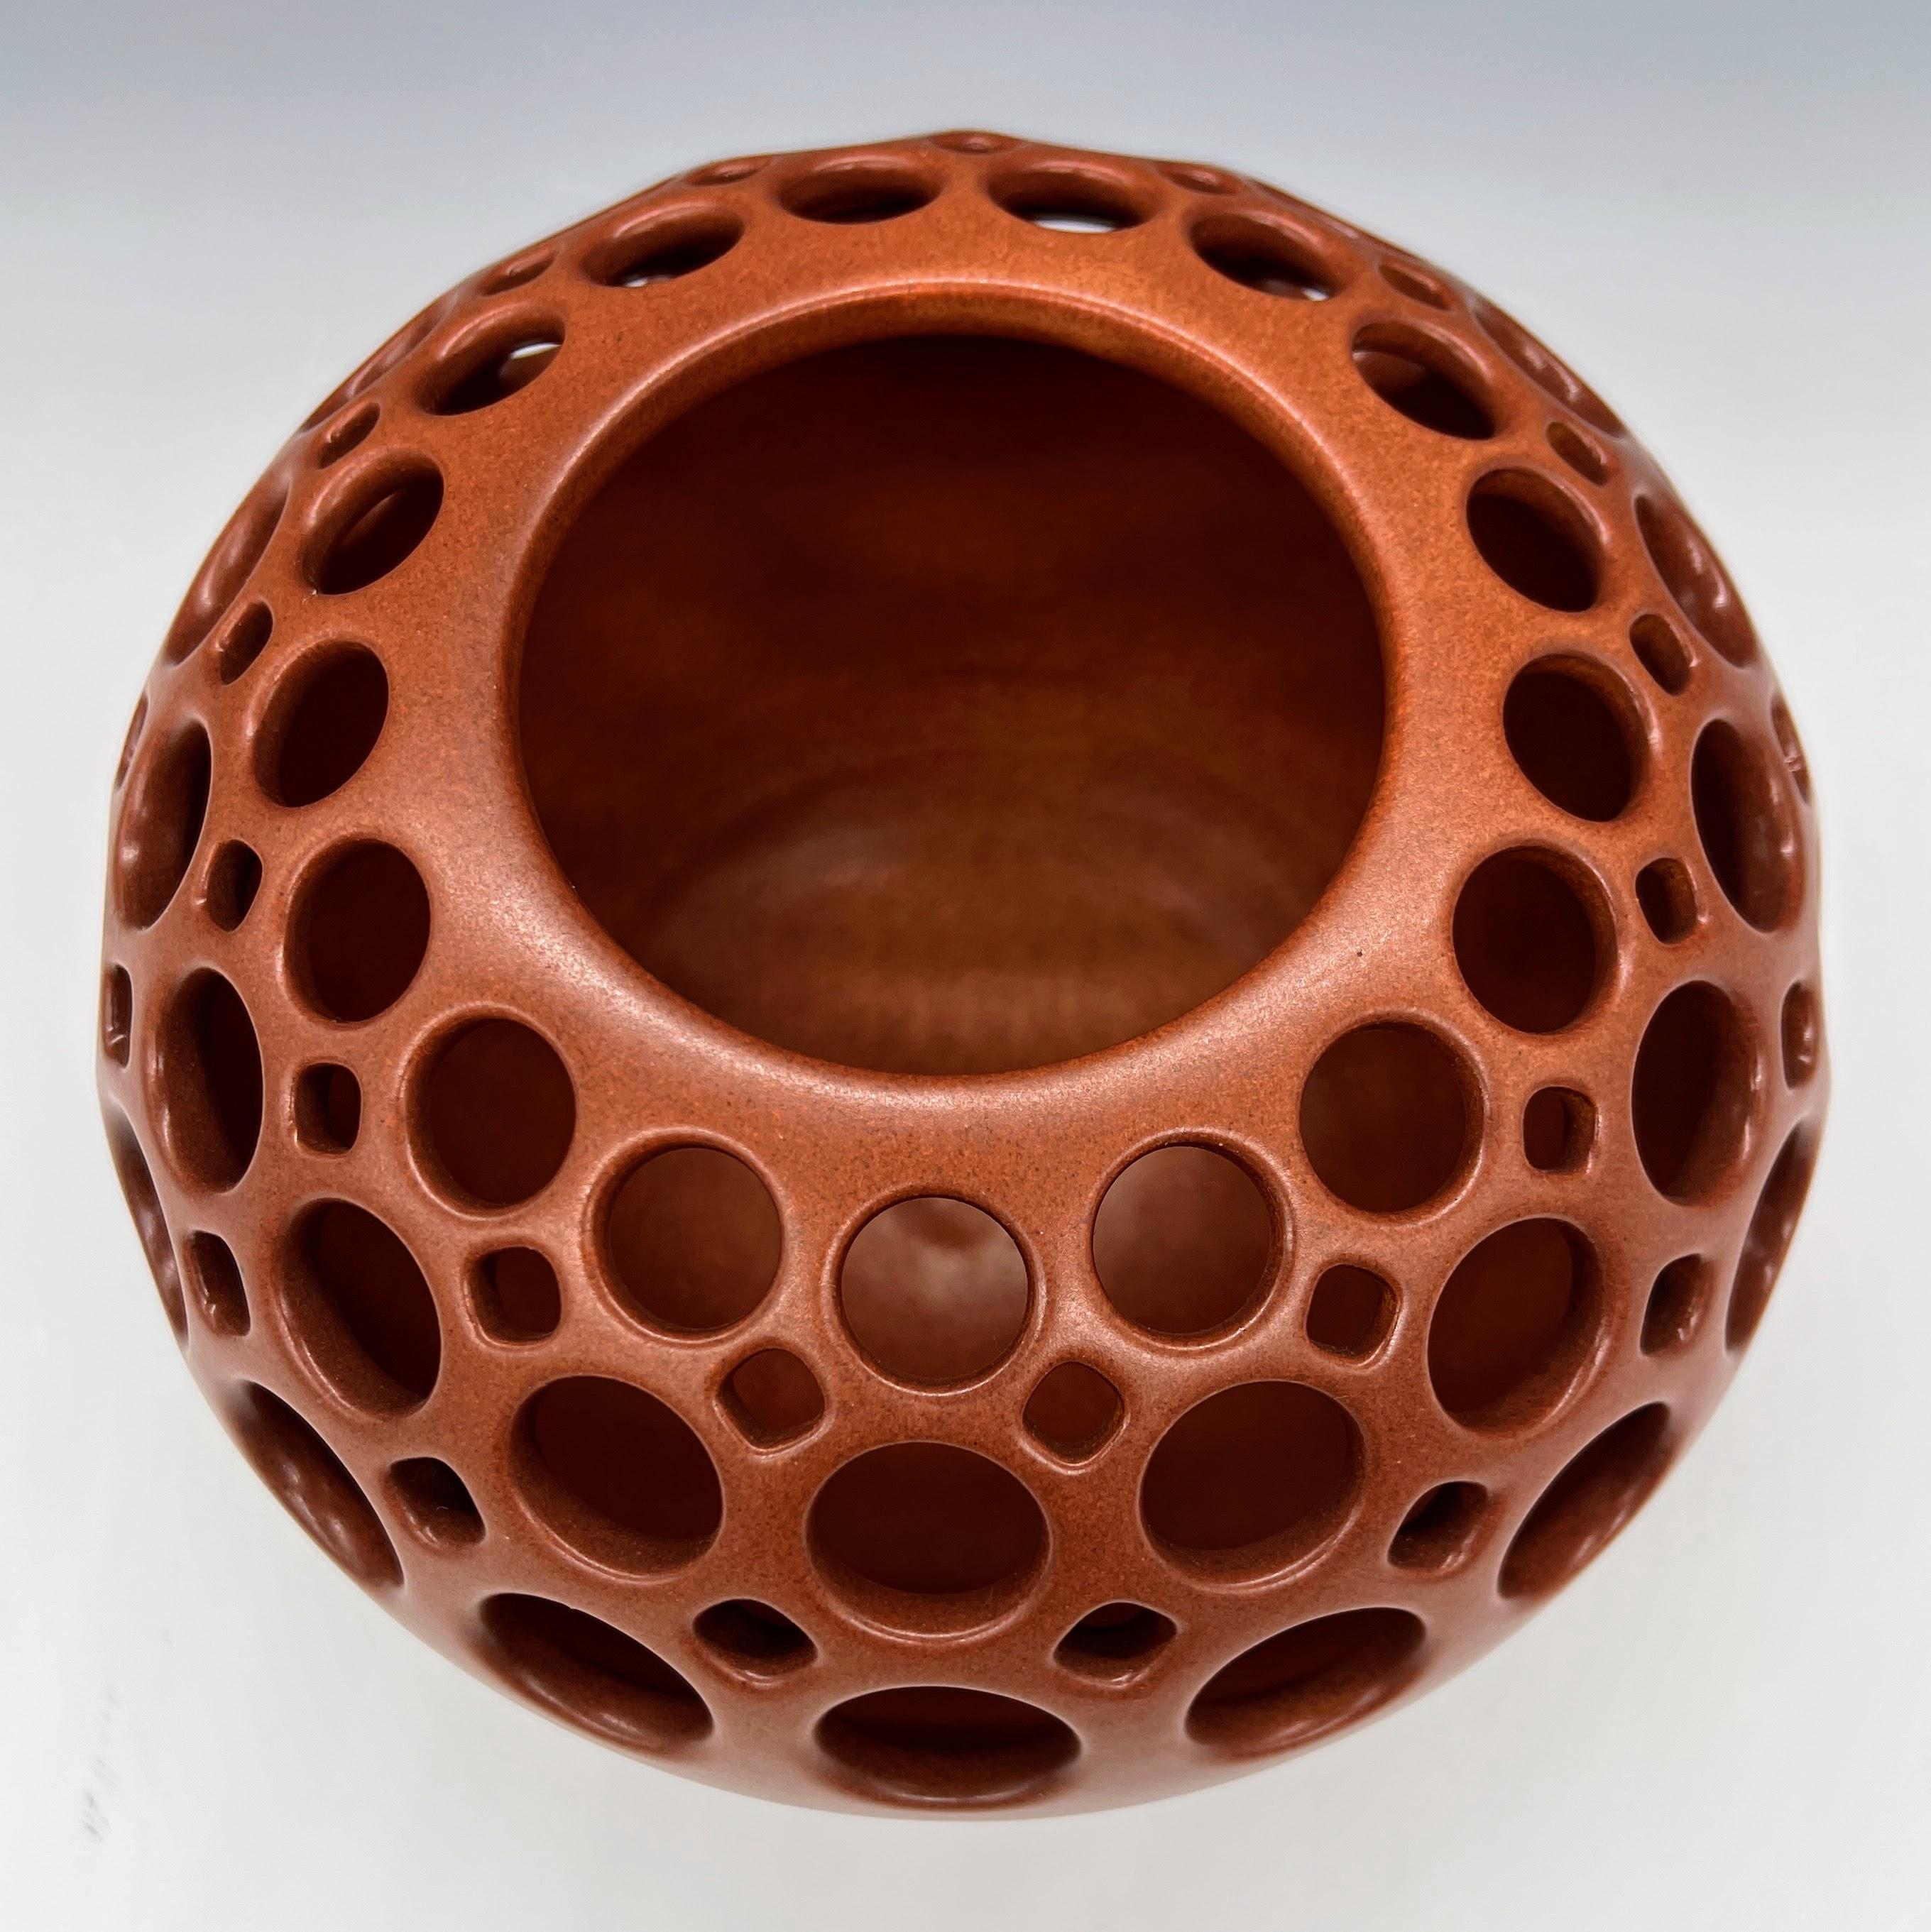 This piece is wheel thrown and hand pierced. When the piece is still wet, small holes are mapped out and pierced. Once the orb is bone dry, each hole is painstakingly enlarged. A burnt sienna satin glaze is then applied and fired. Perfect as a